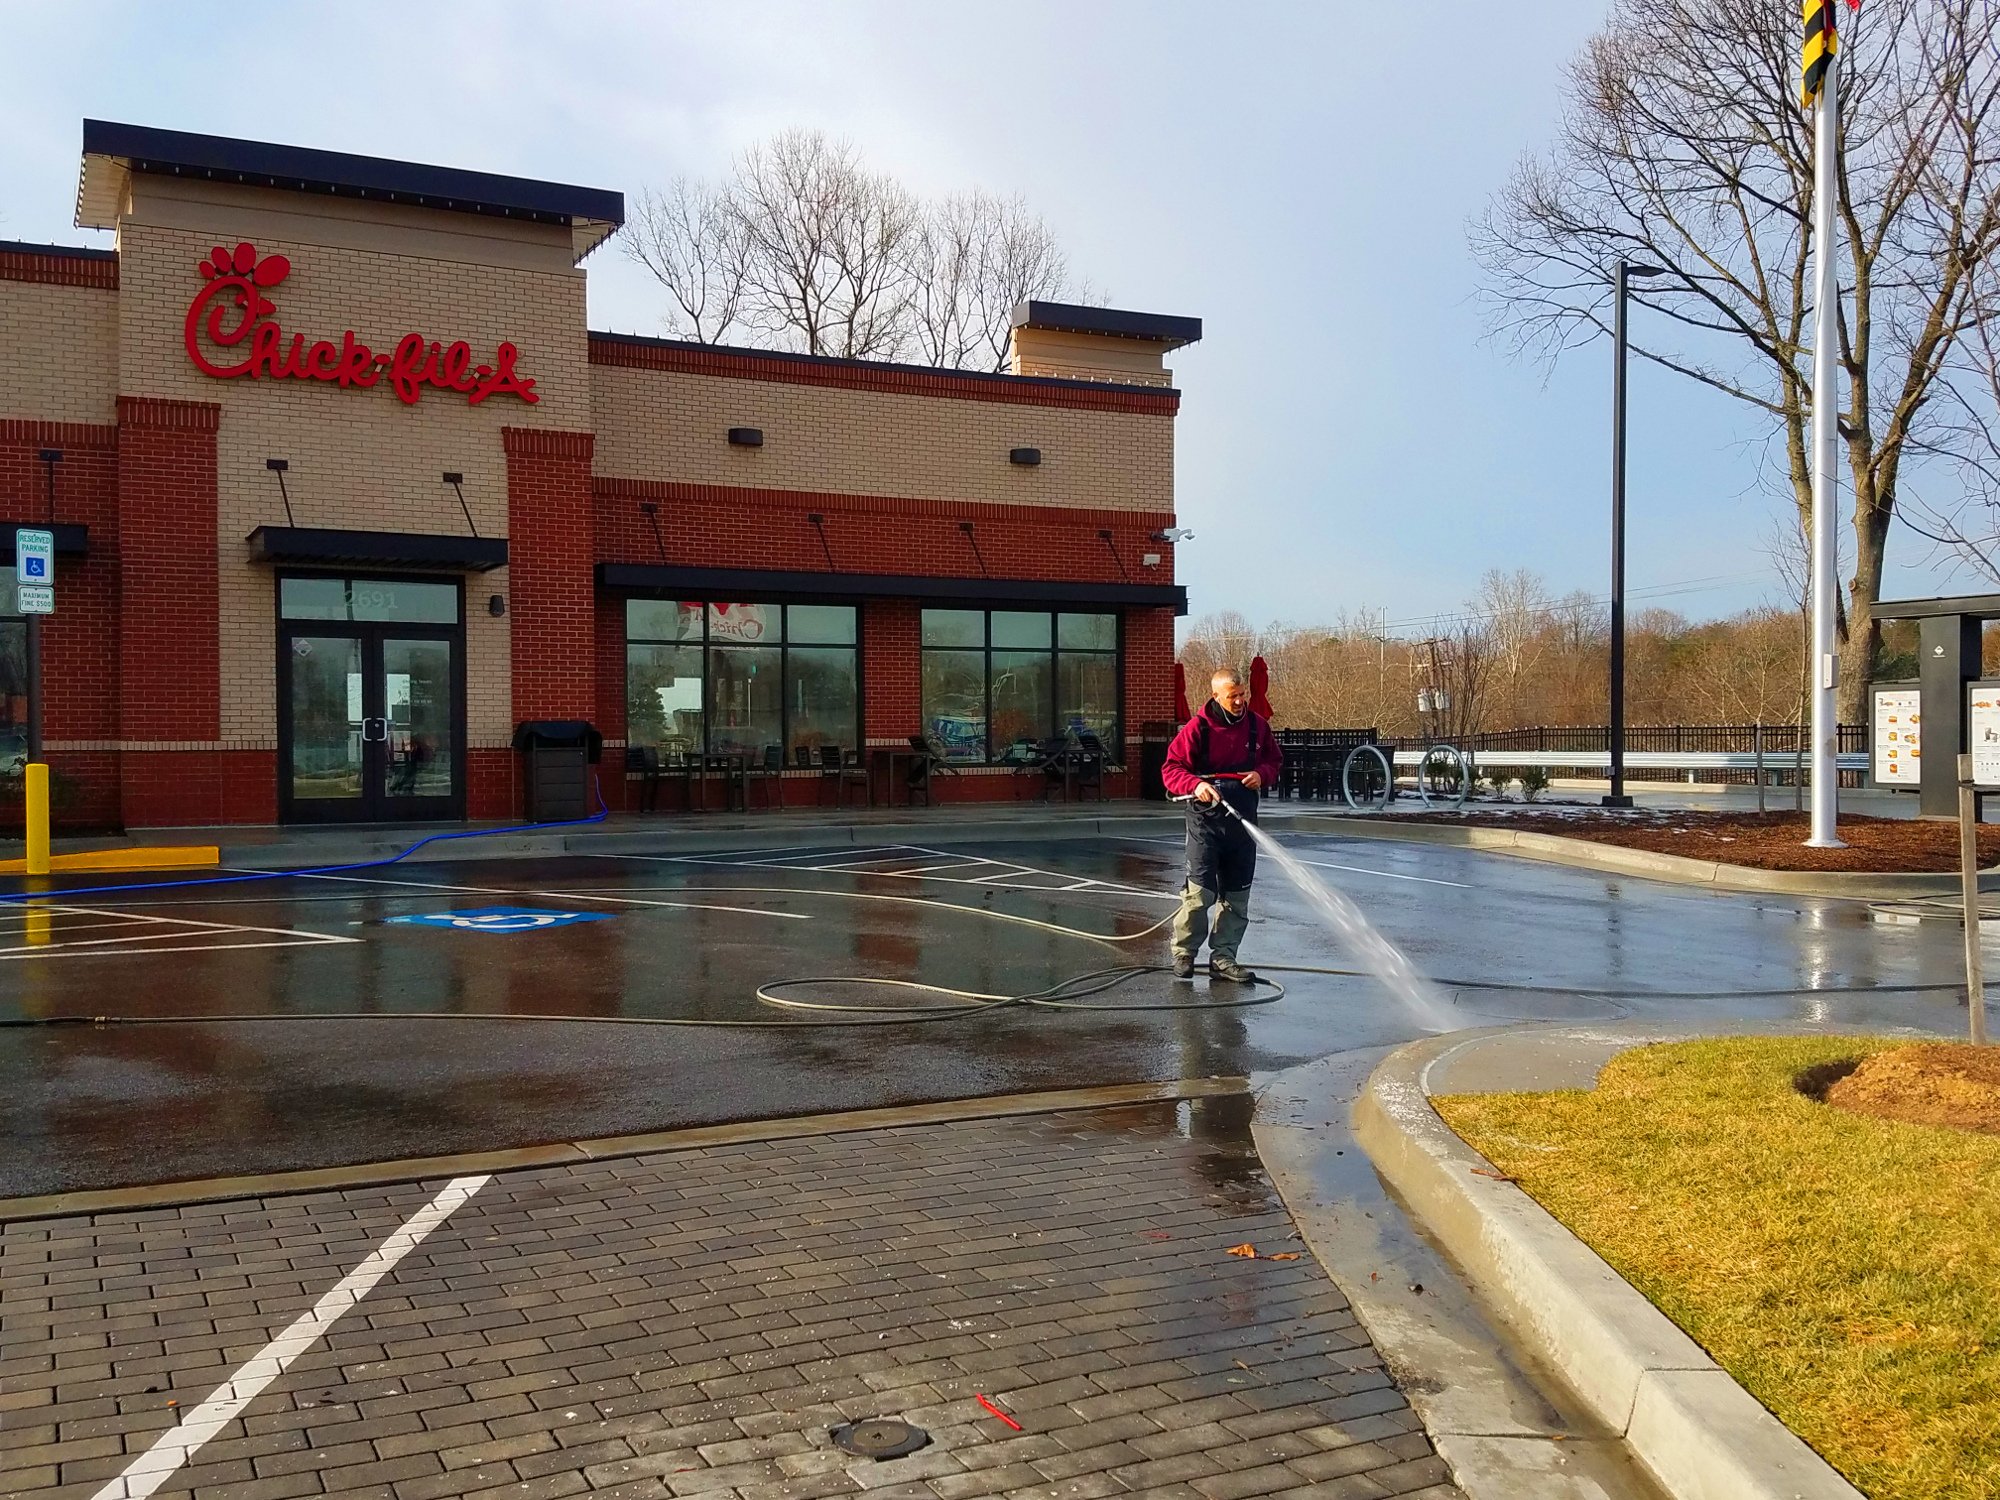 Professional pressure washing parking lot for restaurant Chick-fil-a